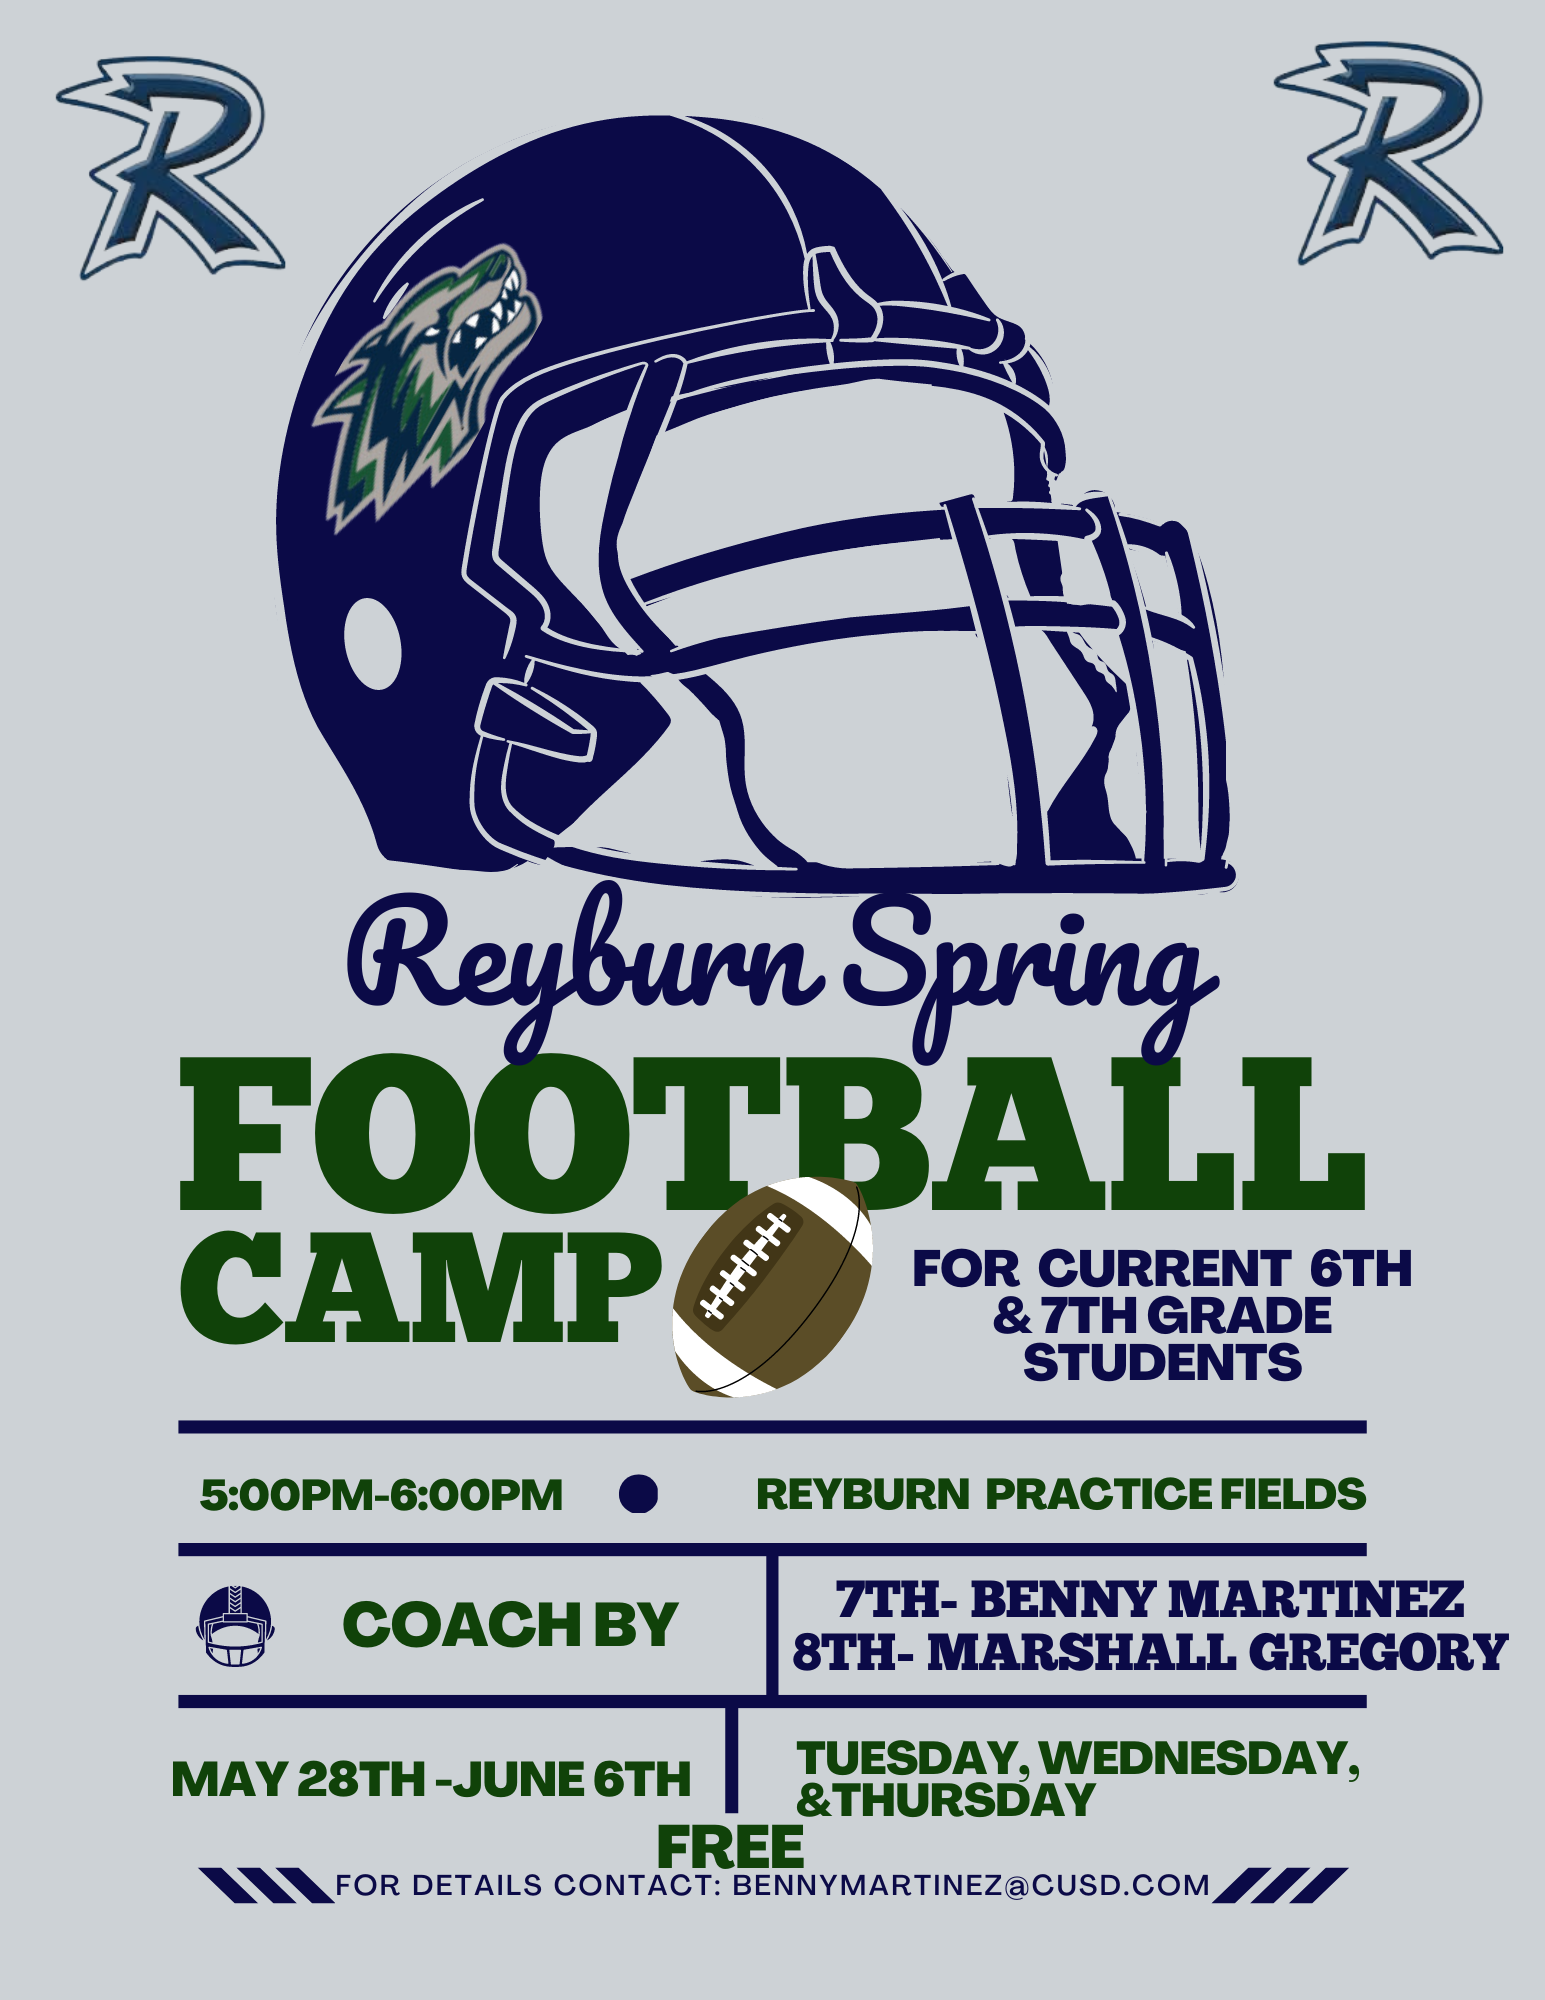 Reyburn Spring Football Camp for 6tha and 7th graders